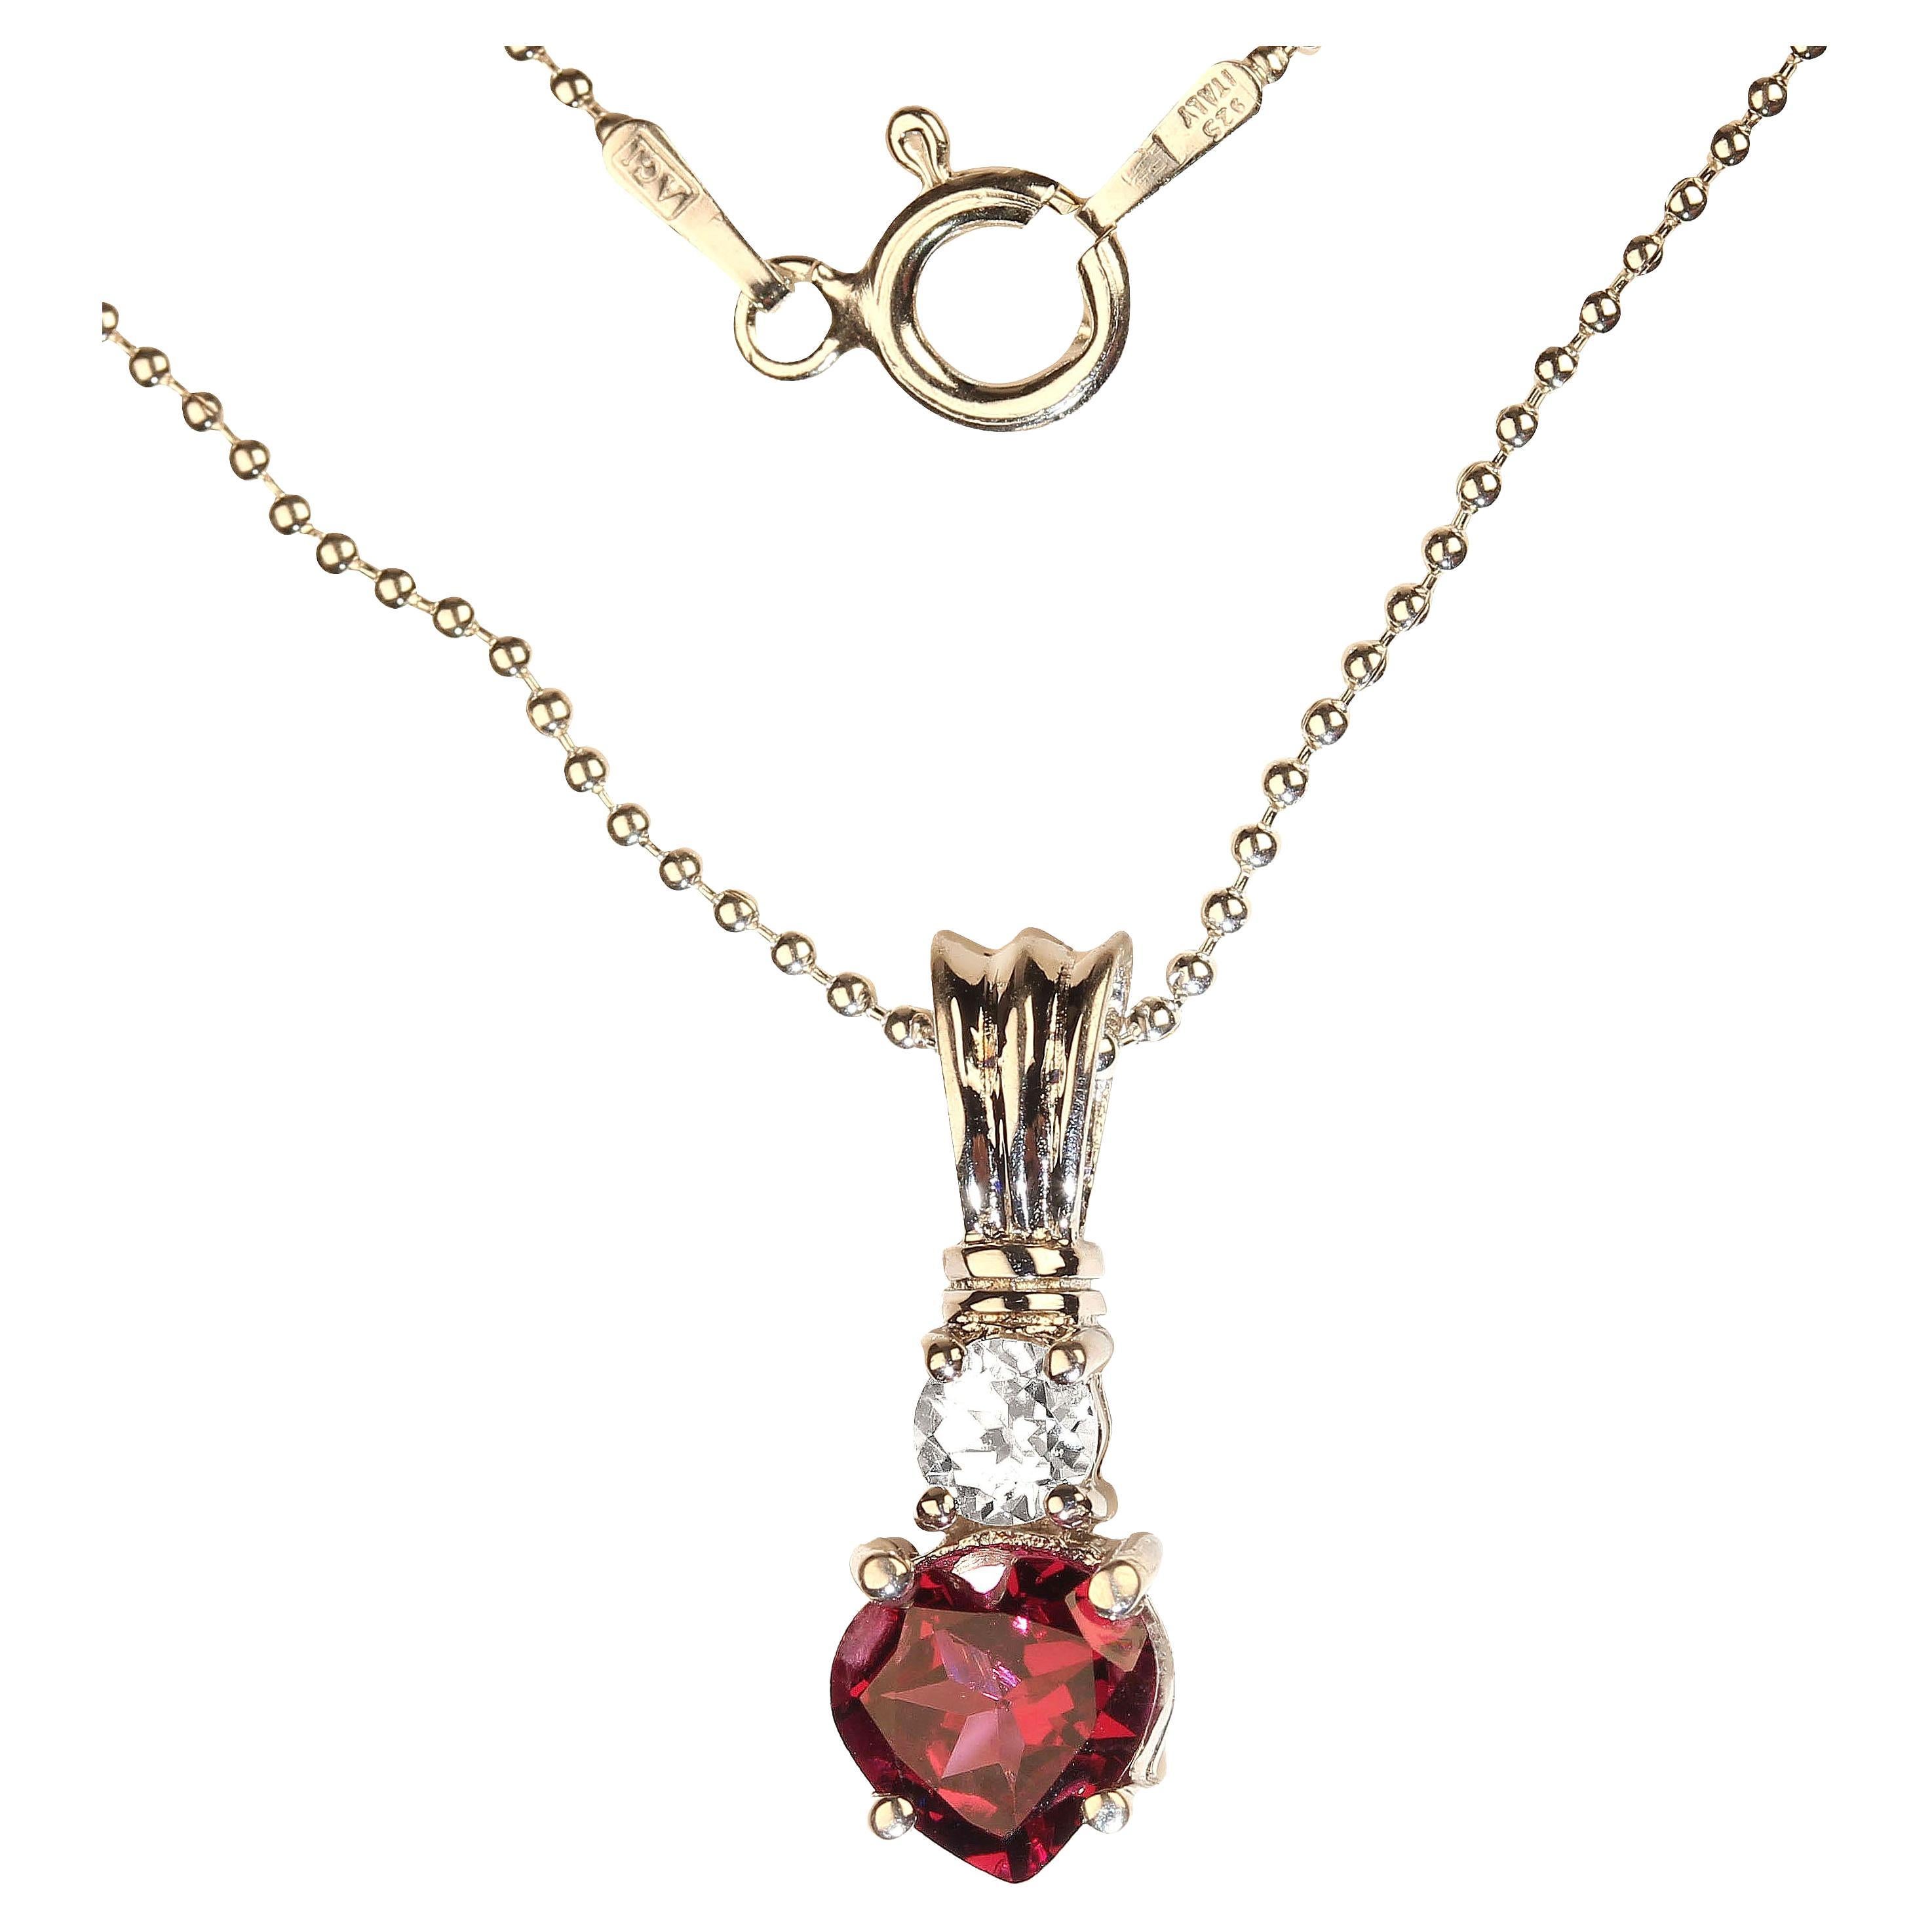 
Sparkling Rhodolite Heart Shape Garnet, 1.21 carats enhanced with real, natural zircon of 0.42 carats in sterling silver pendant. This lovely pendant has the special character of Rhodolites, purply-red flashes! The entire length of the pendant is